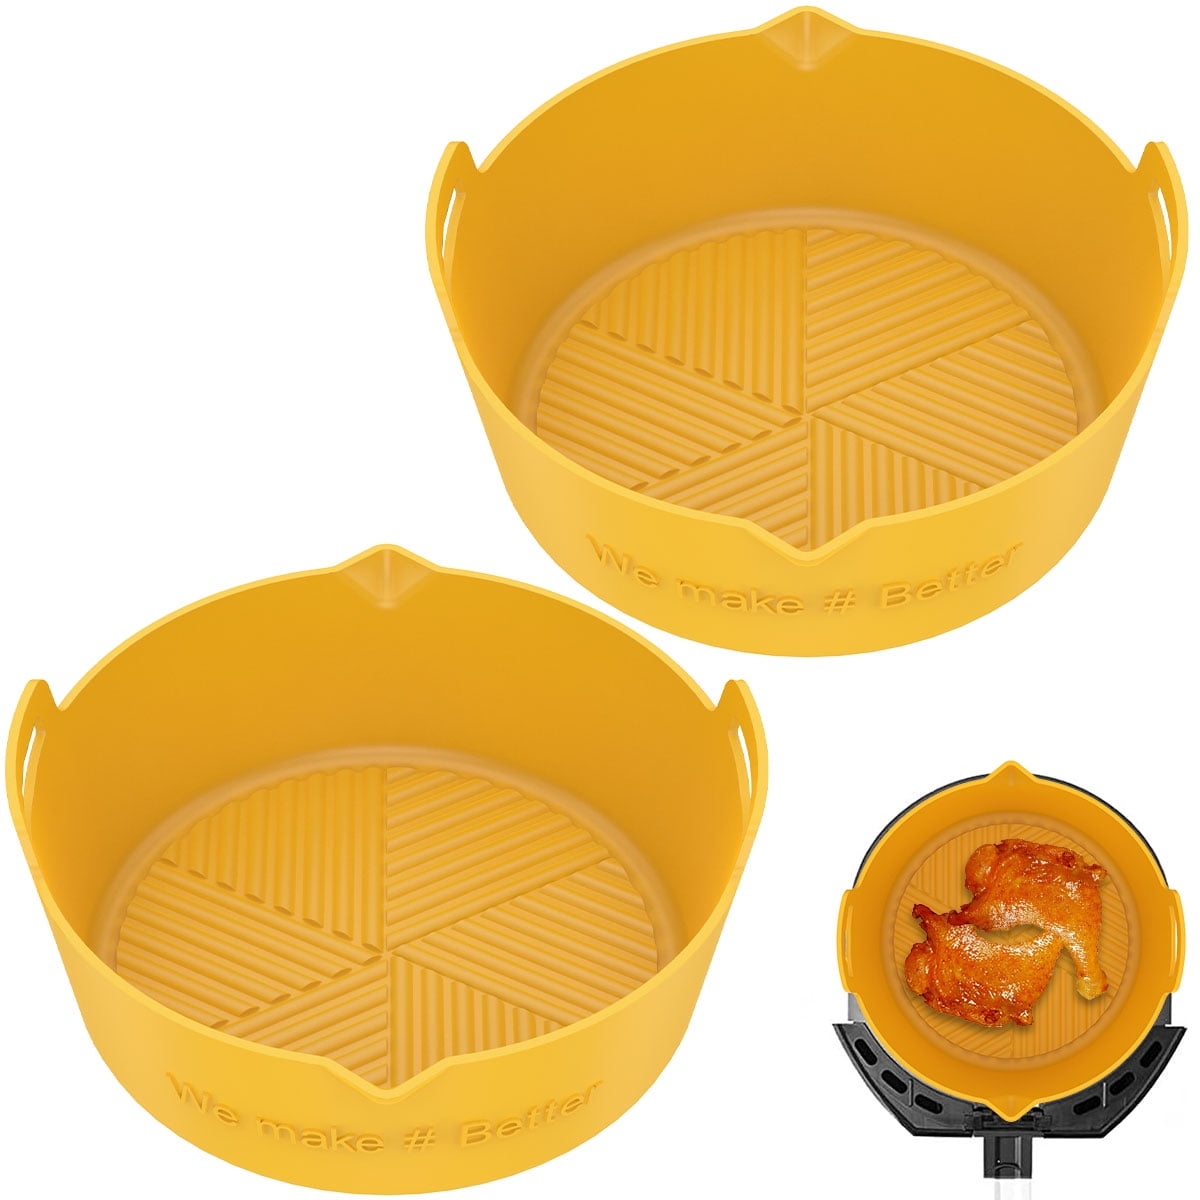 2-Pack Ninja Foodi Dual Silicone Air Fryer Liners, Heavy-Duty Air Fryer  Silicone Pots, Reusable Air Fryer Accessories Insert, Food-Grade BPA-Free,  for 6-8QT Dual Basket DZ201/DZ100/DZ090 and More 